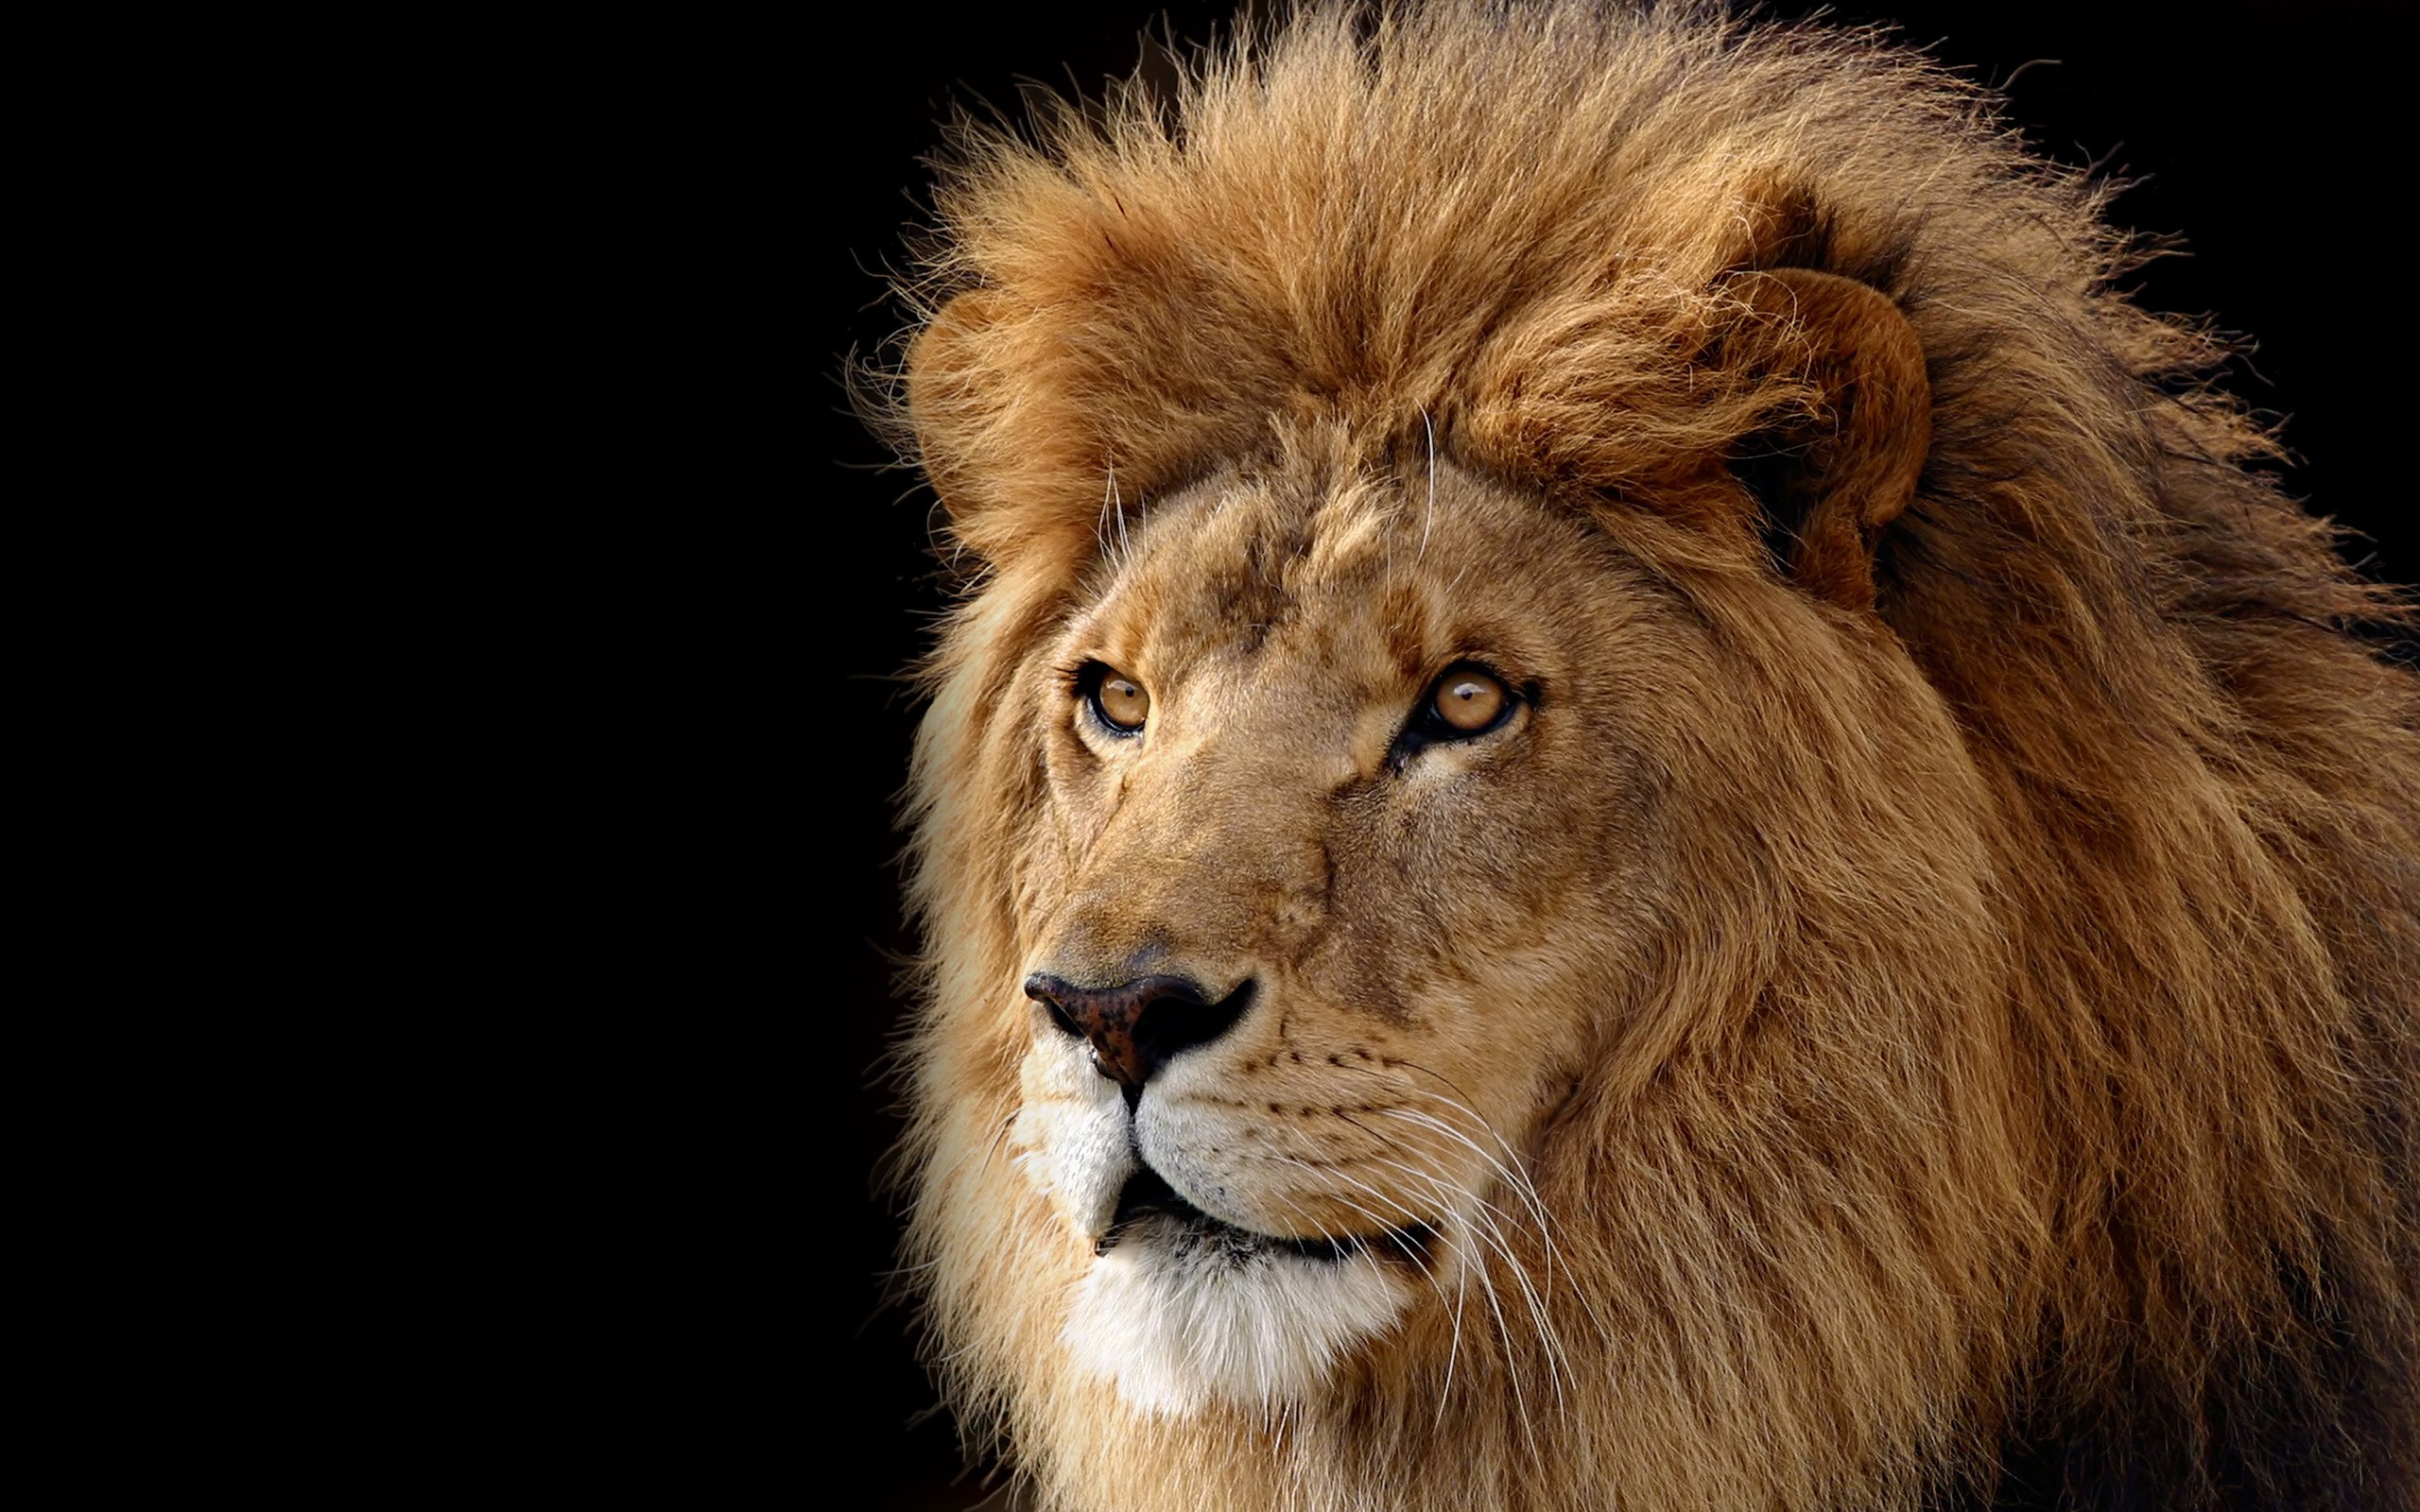 Mac OS X the Lion Apple systems official HD wallpapers #14 - 2560x1600